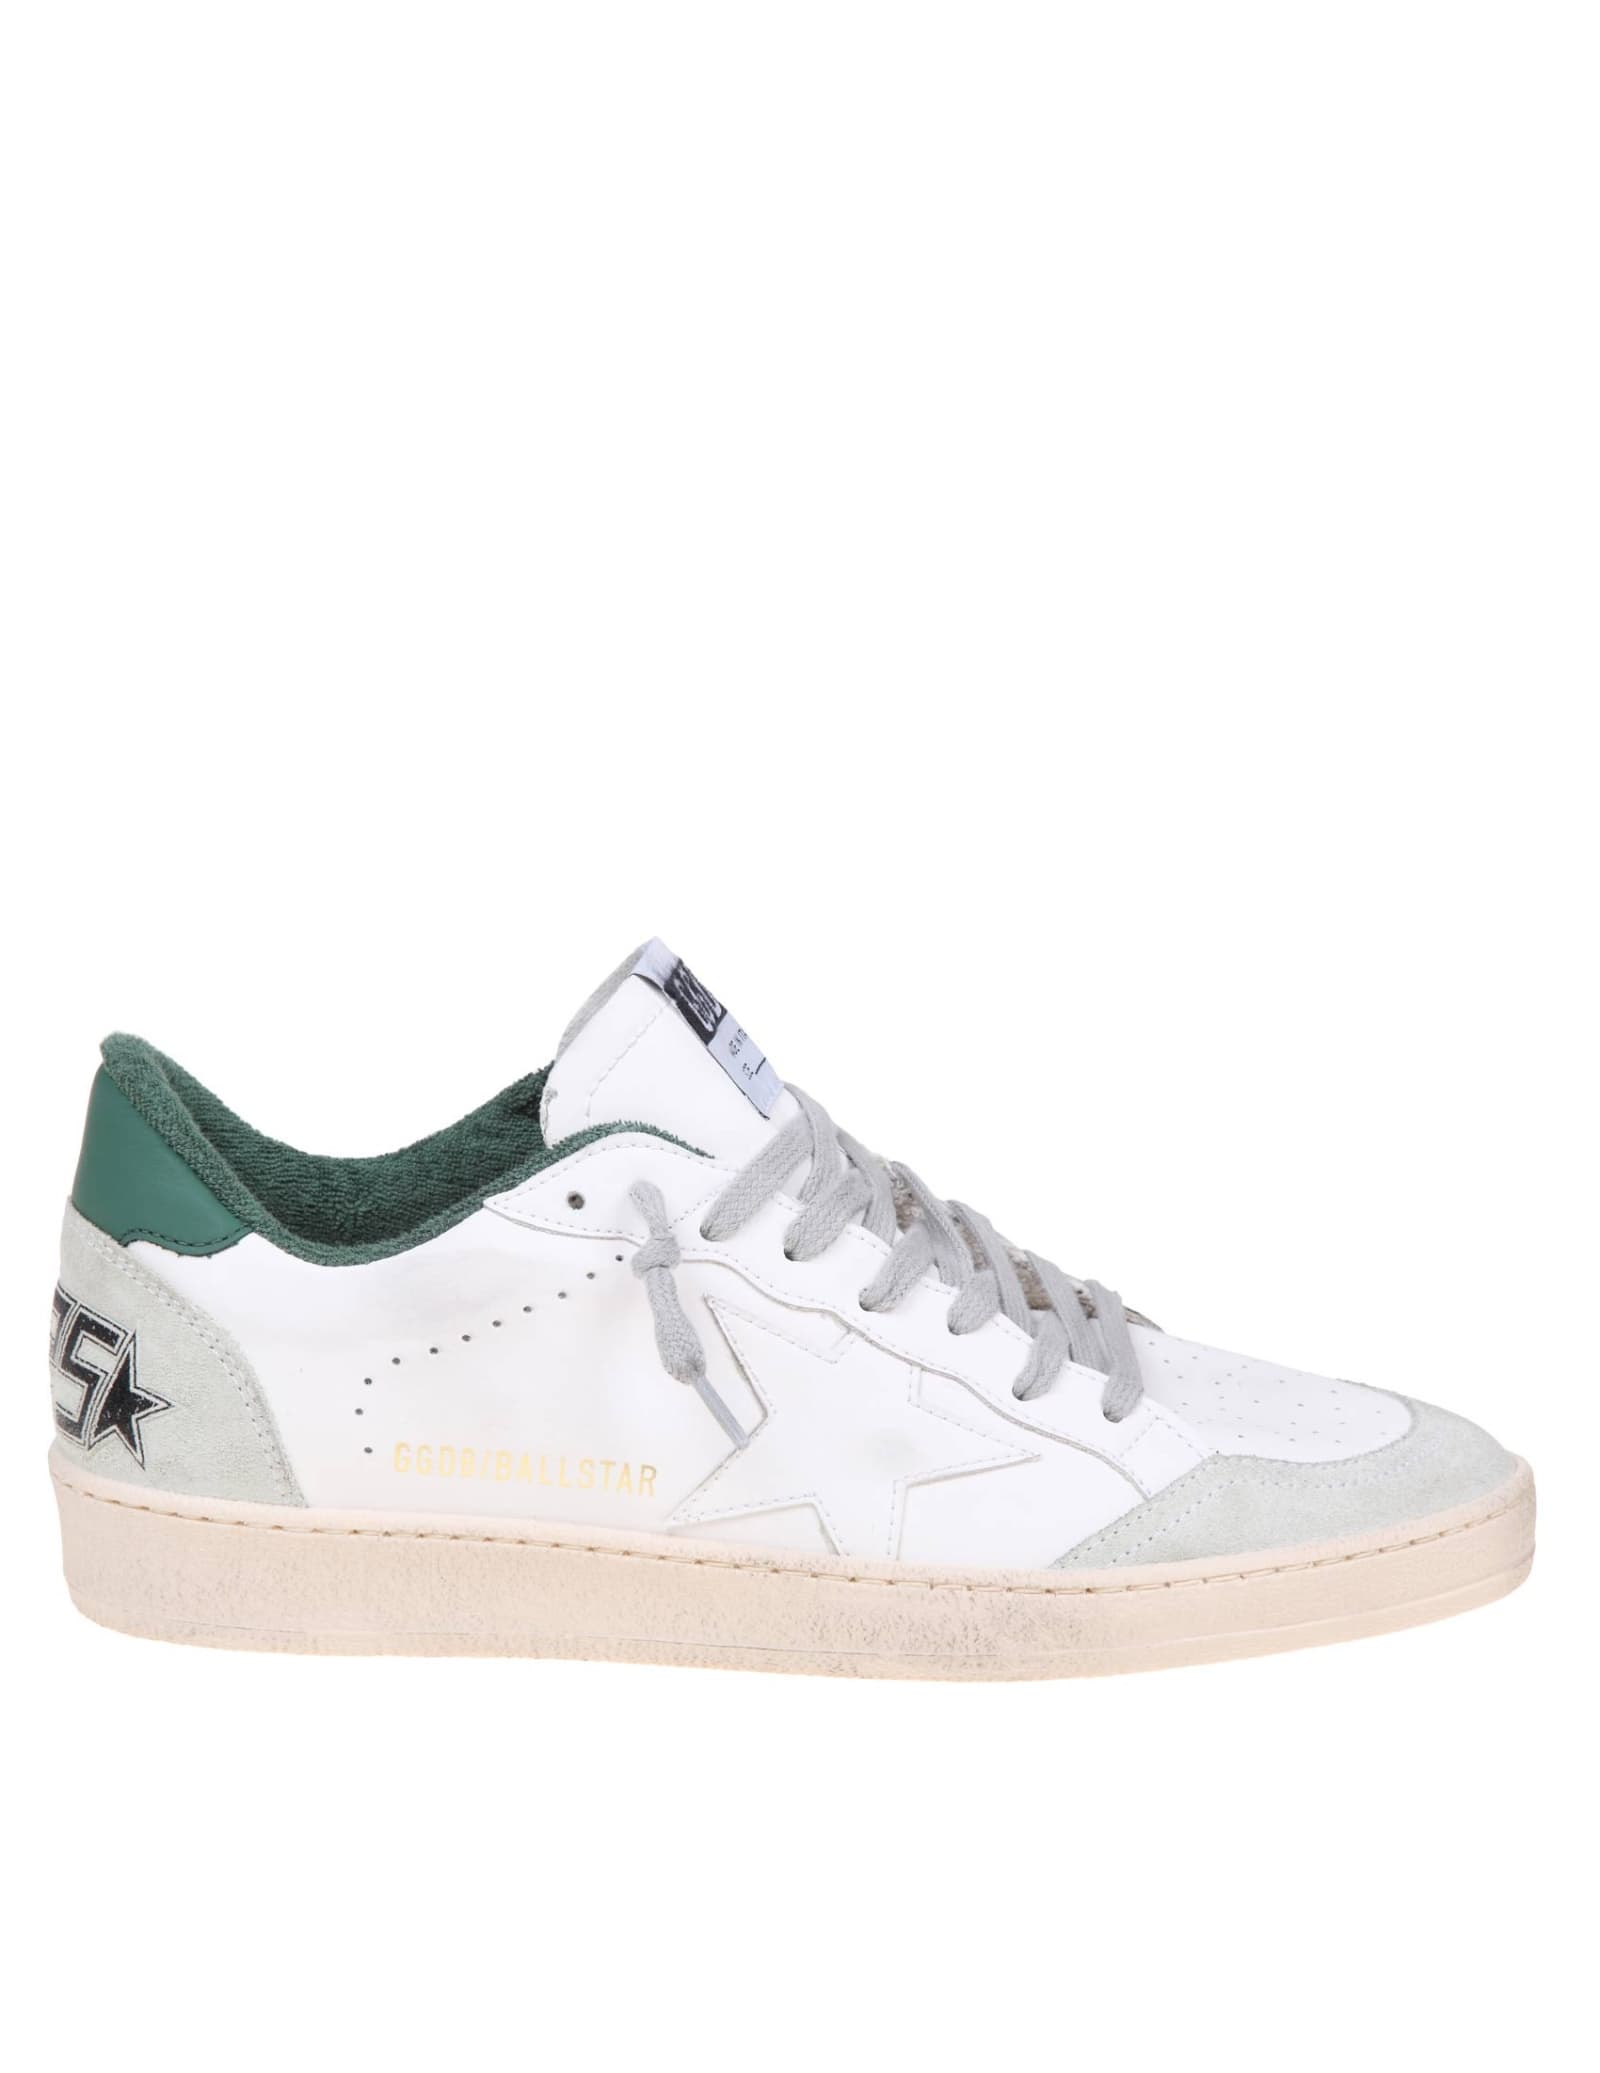 Shop Golden Goose Ballstar Sneakers In White And Green Leather In White/ice